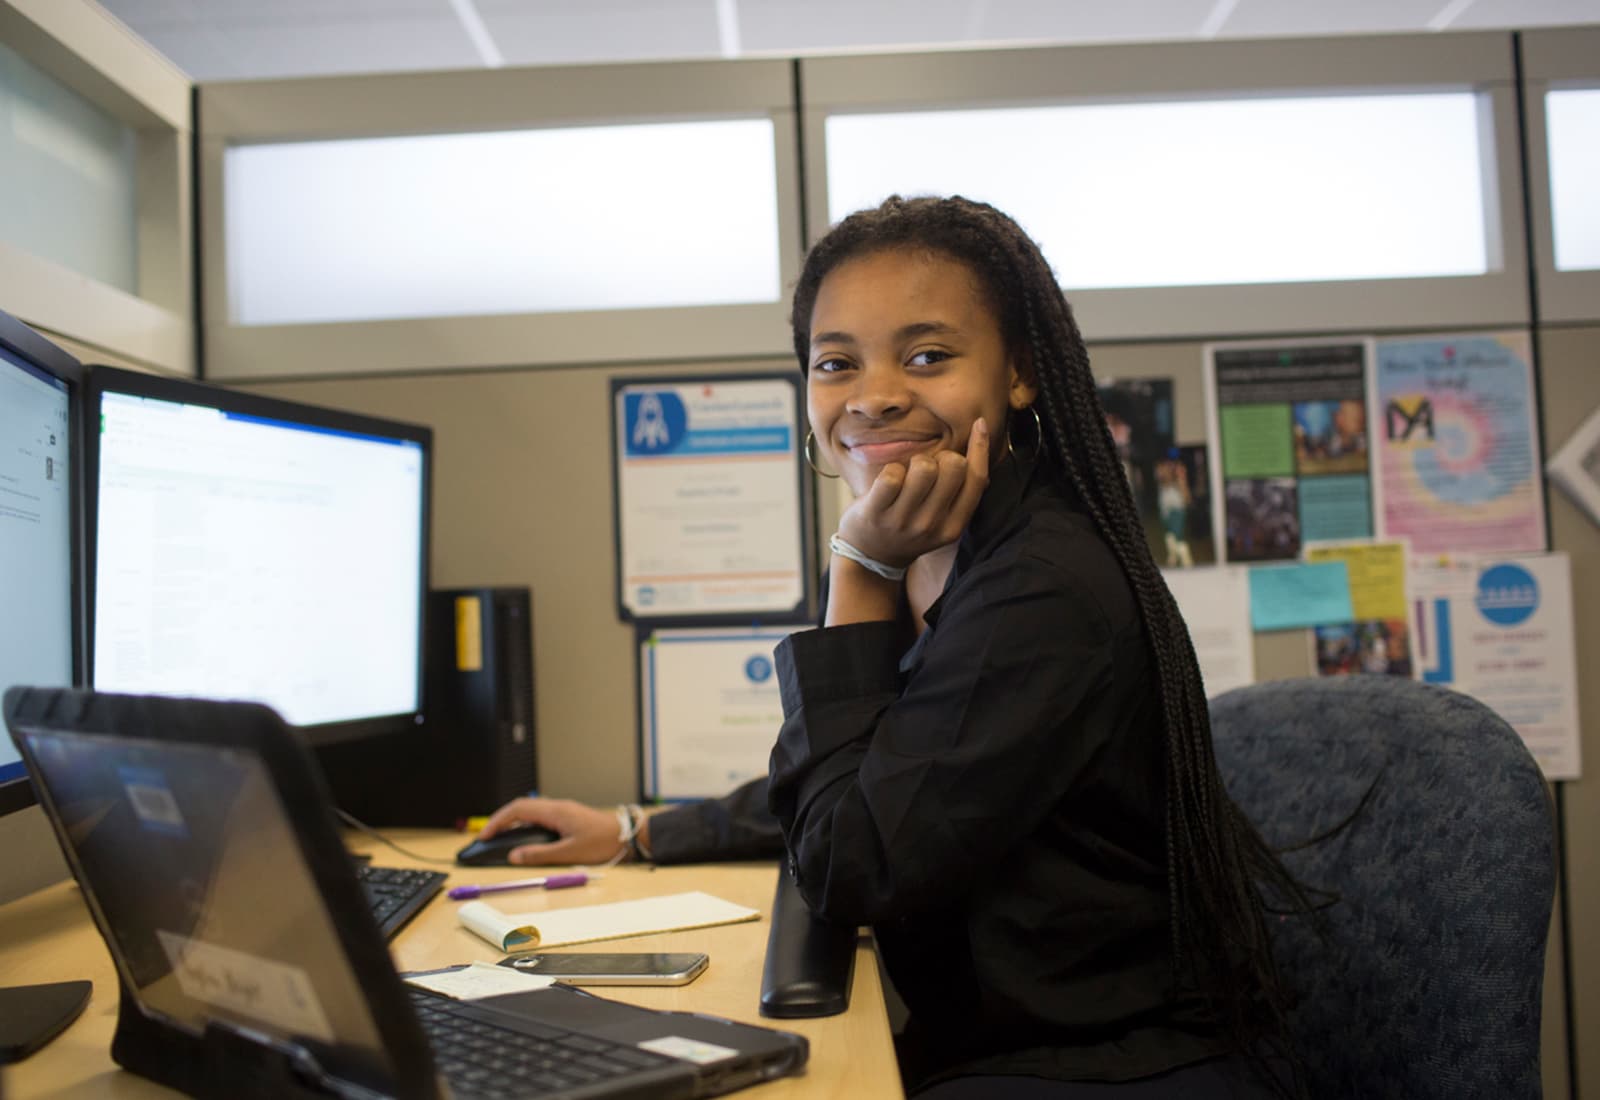 Delaware Pathways provides students with pathways to success, whether that means earning an associates degree, gaining an industry credential, or graduating from a university with a four-year degree.